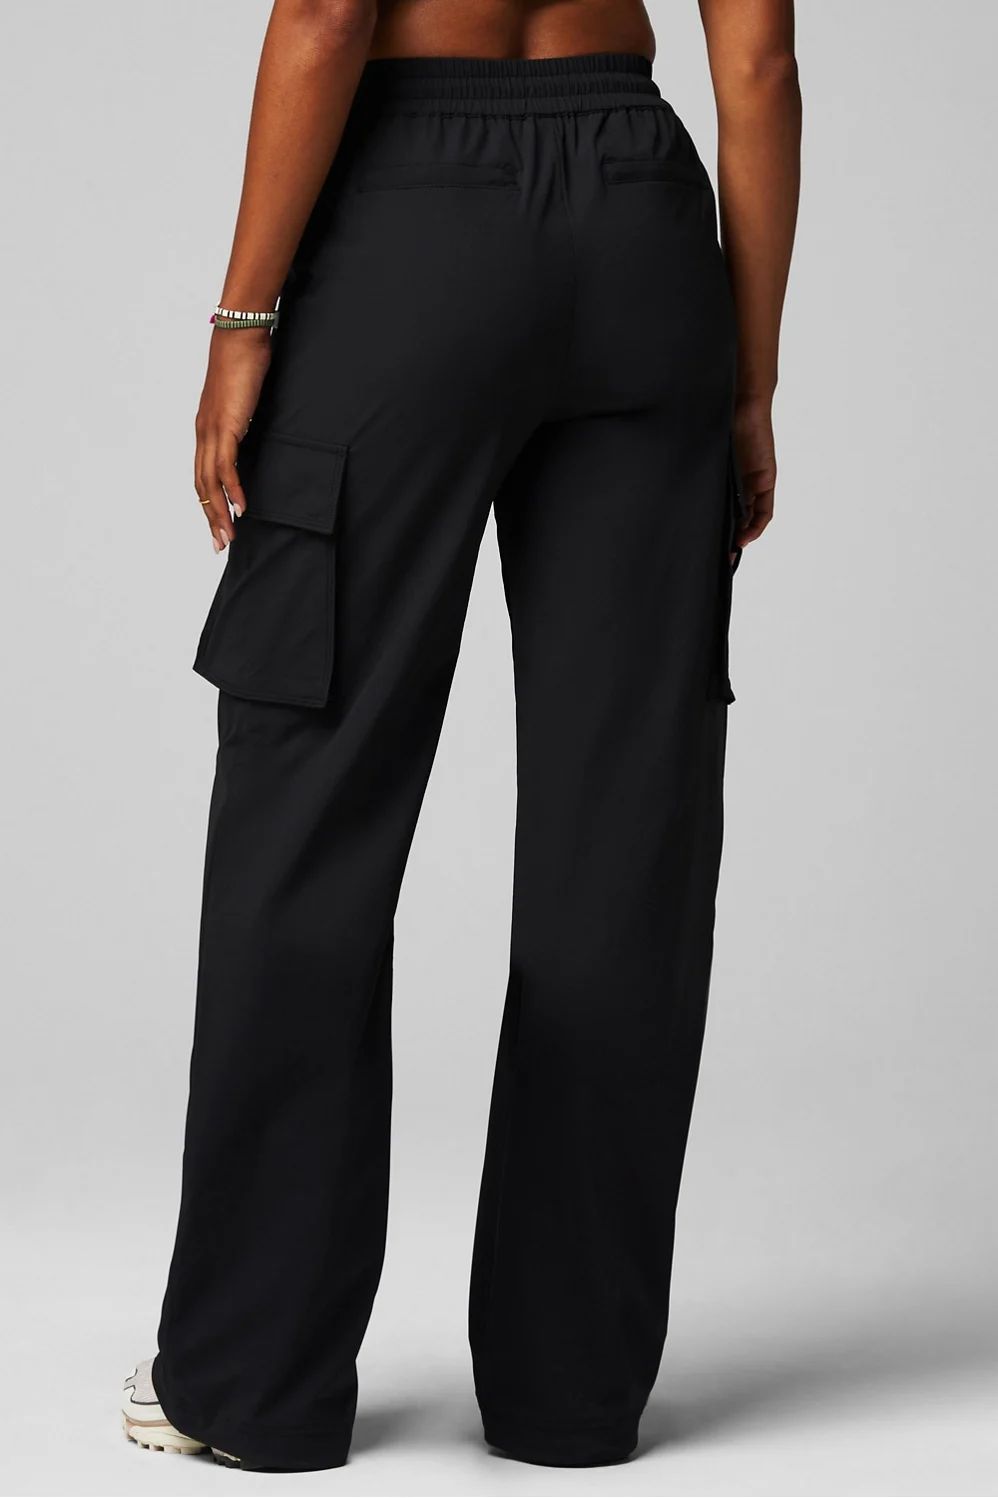 Heights Cargo Pant | Fabletics - North America